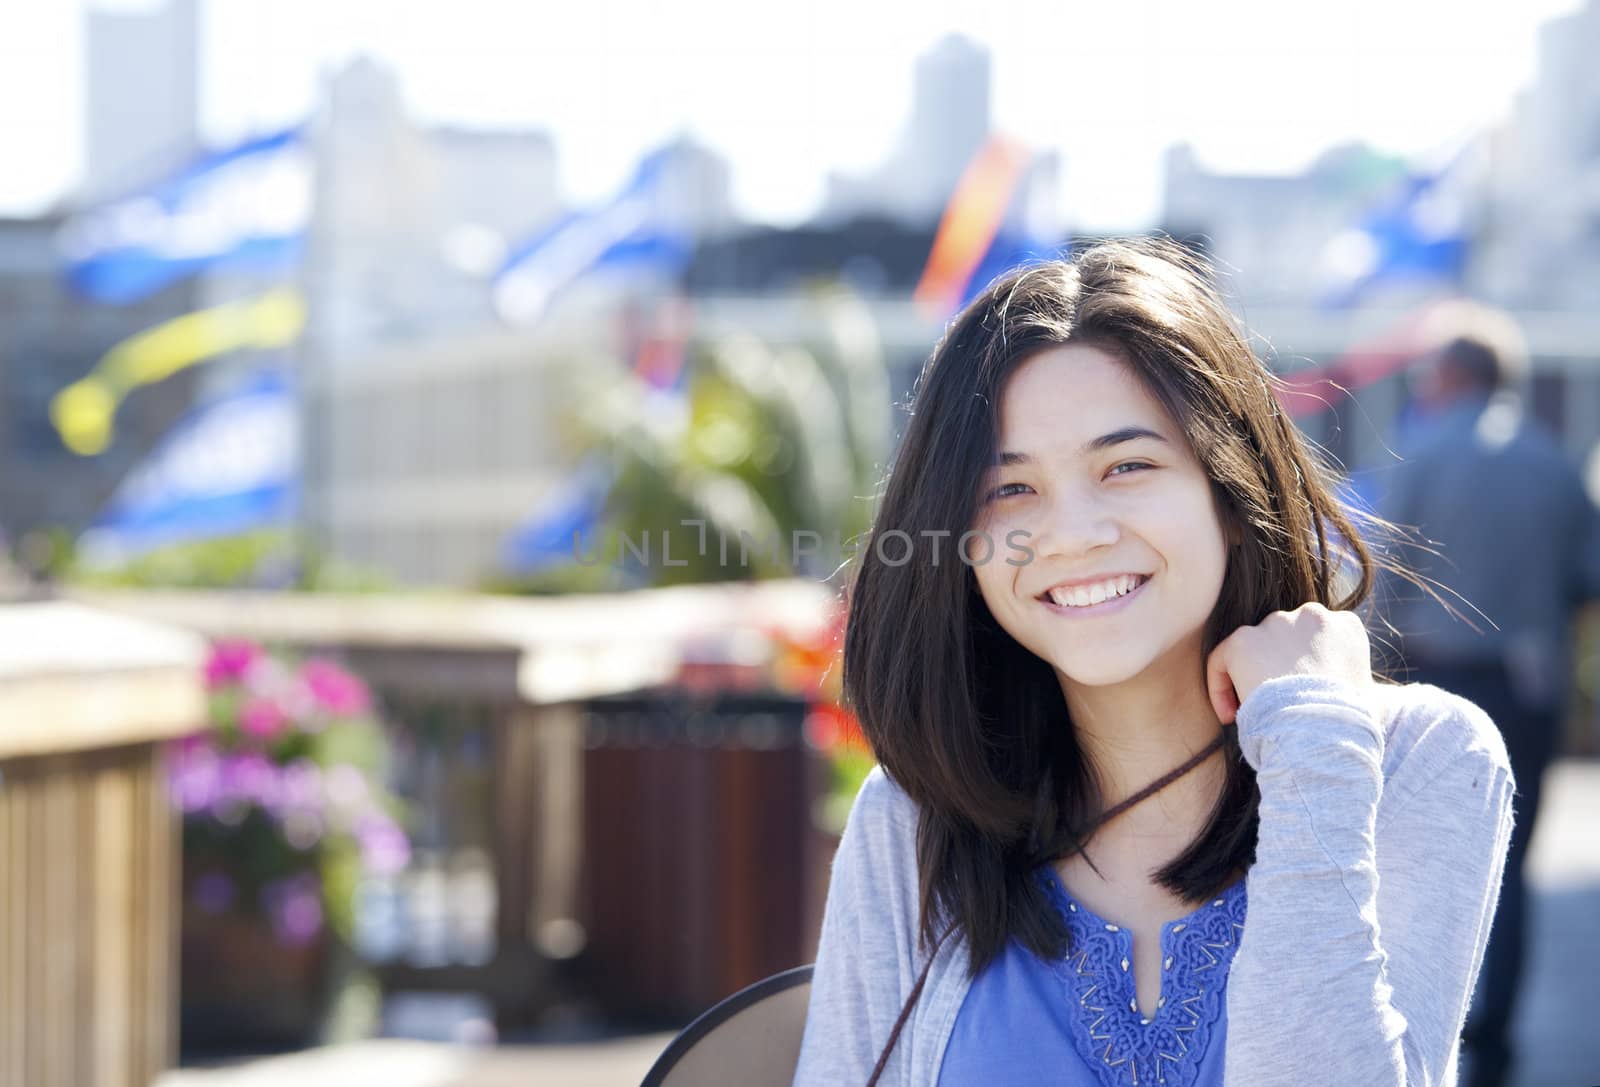 Young biracial teen girl smiling outdoors, sunny colorful background colors